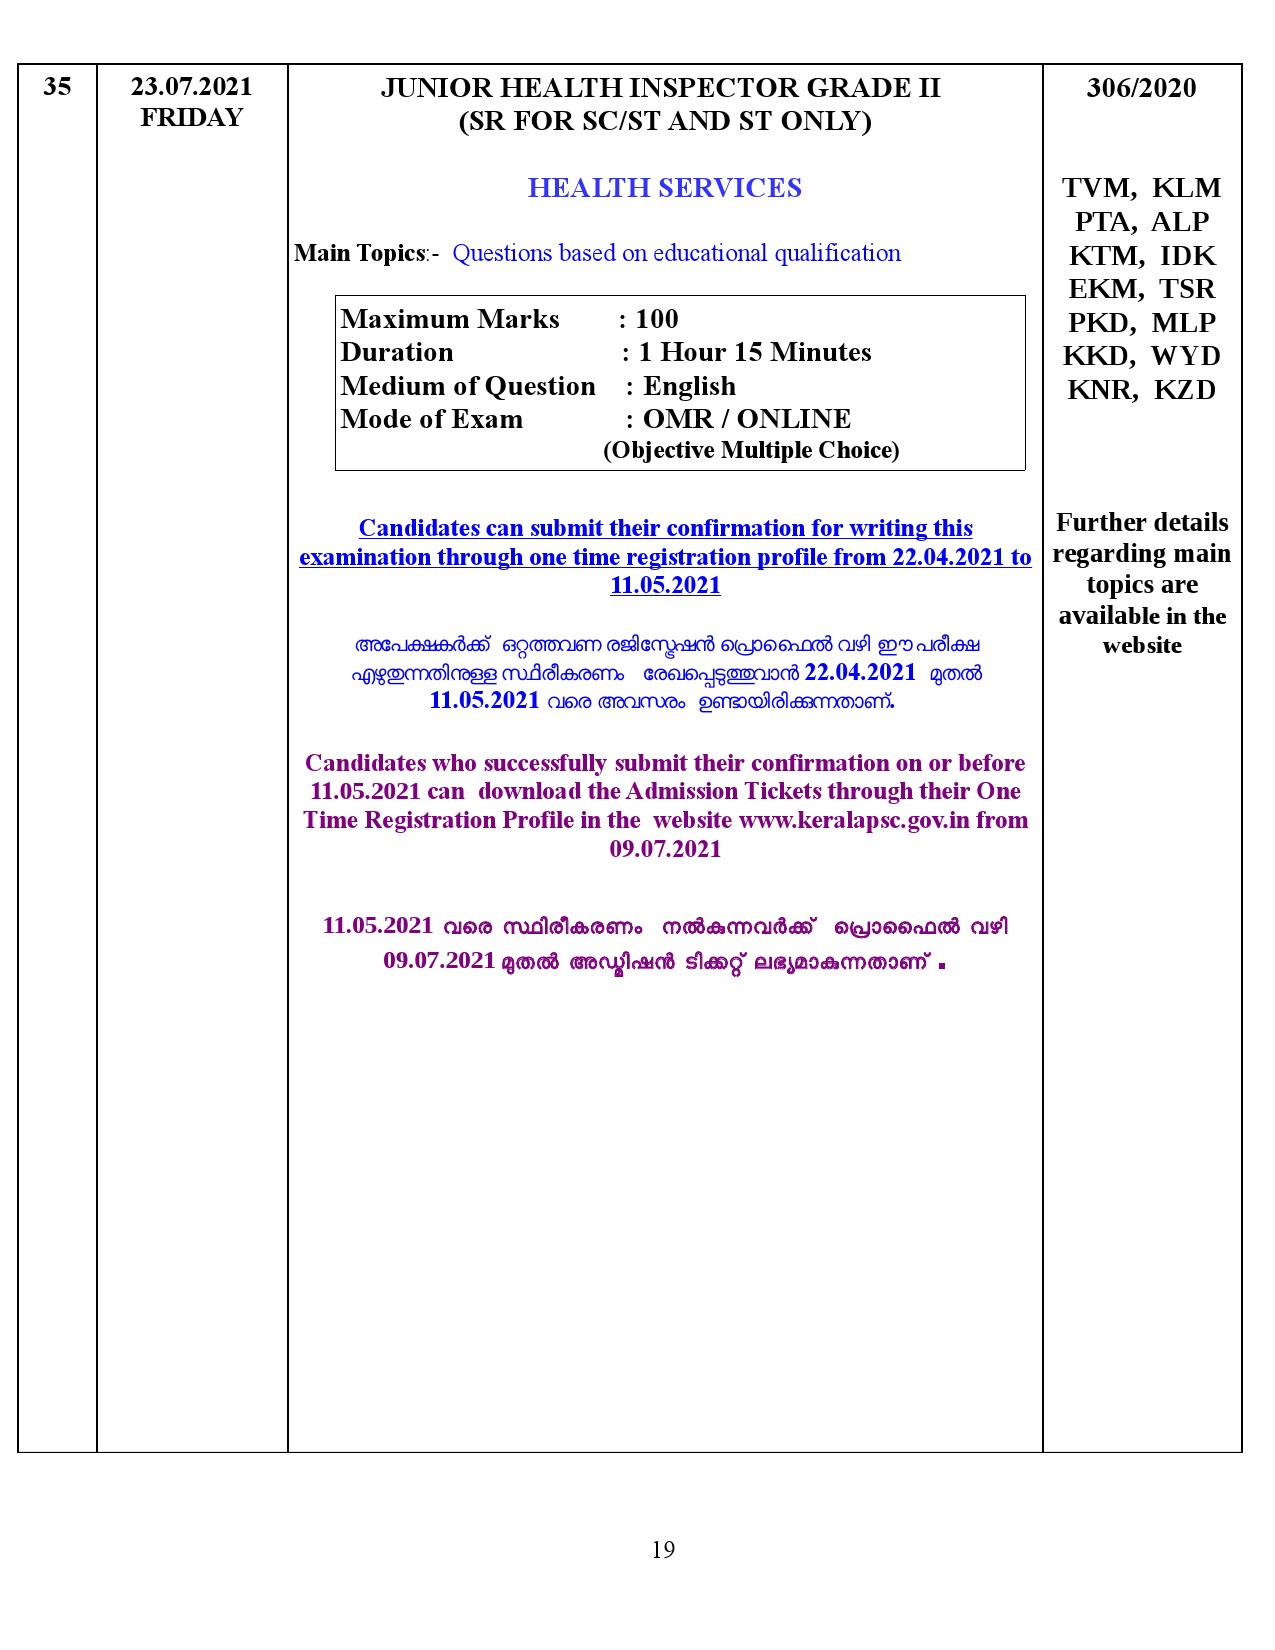 KPSC Examination Programme For The Month Of July 2021 - Notification Image 19